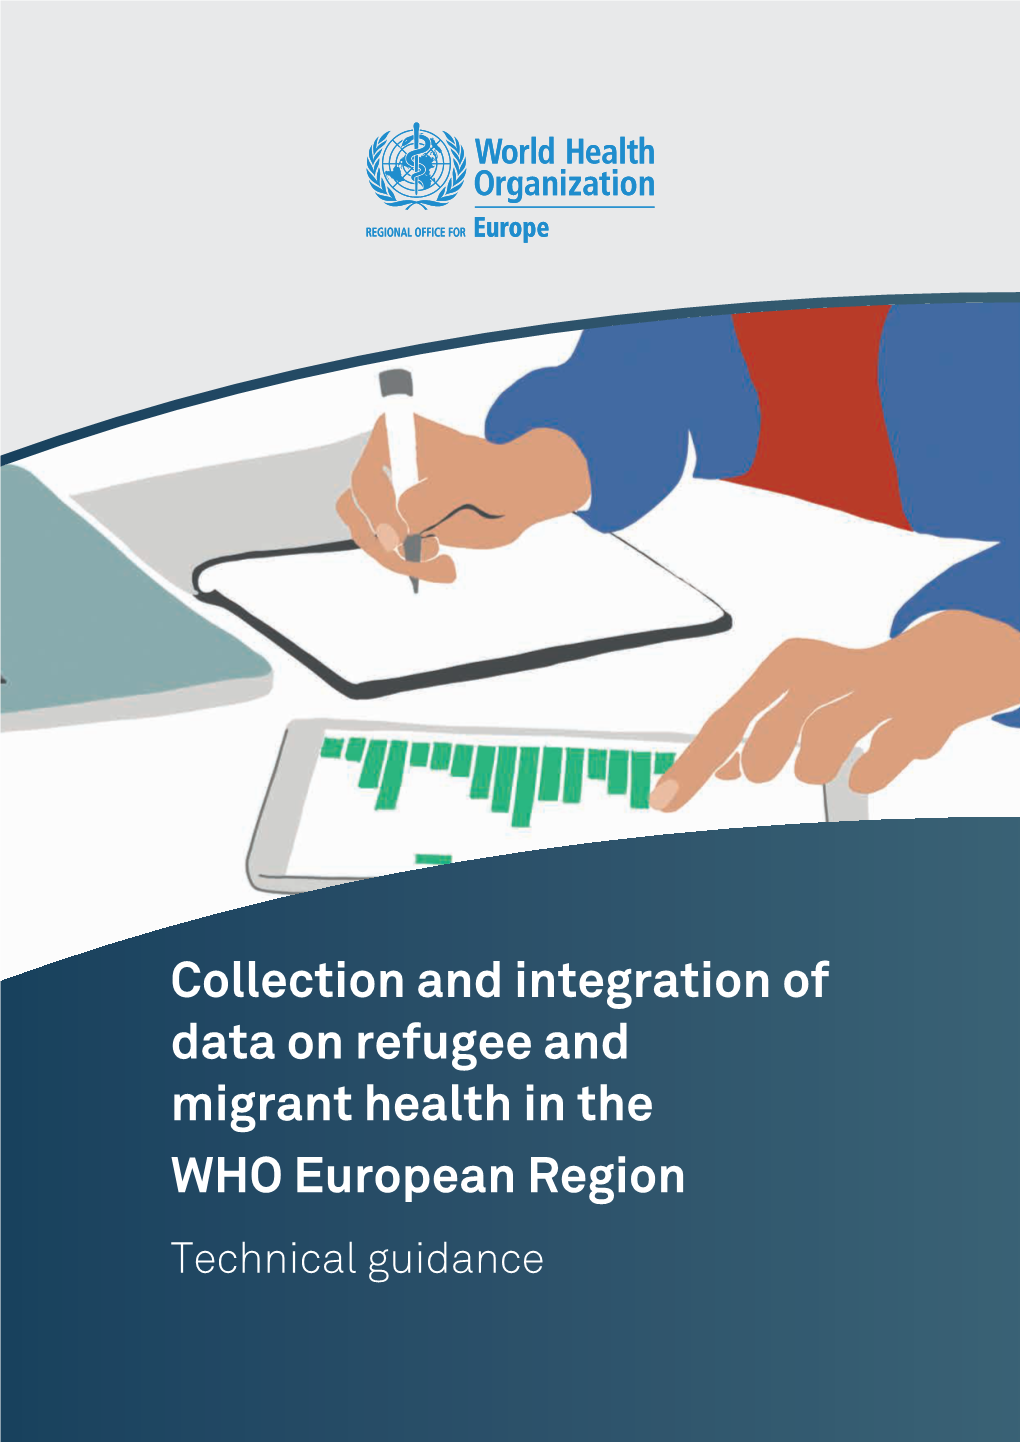 Collection and Integration of Data on Refugee and Migrant Health in the WHO European Region Technical Guidance the Migration and Health Programme